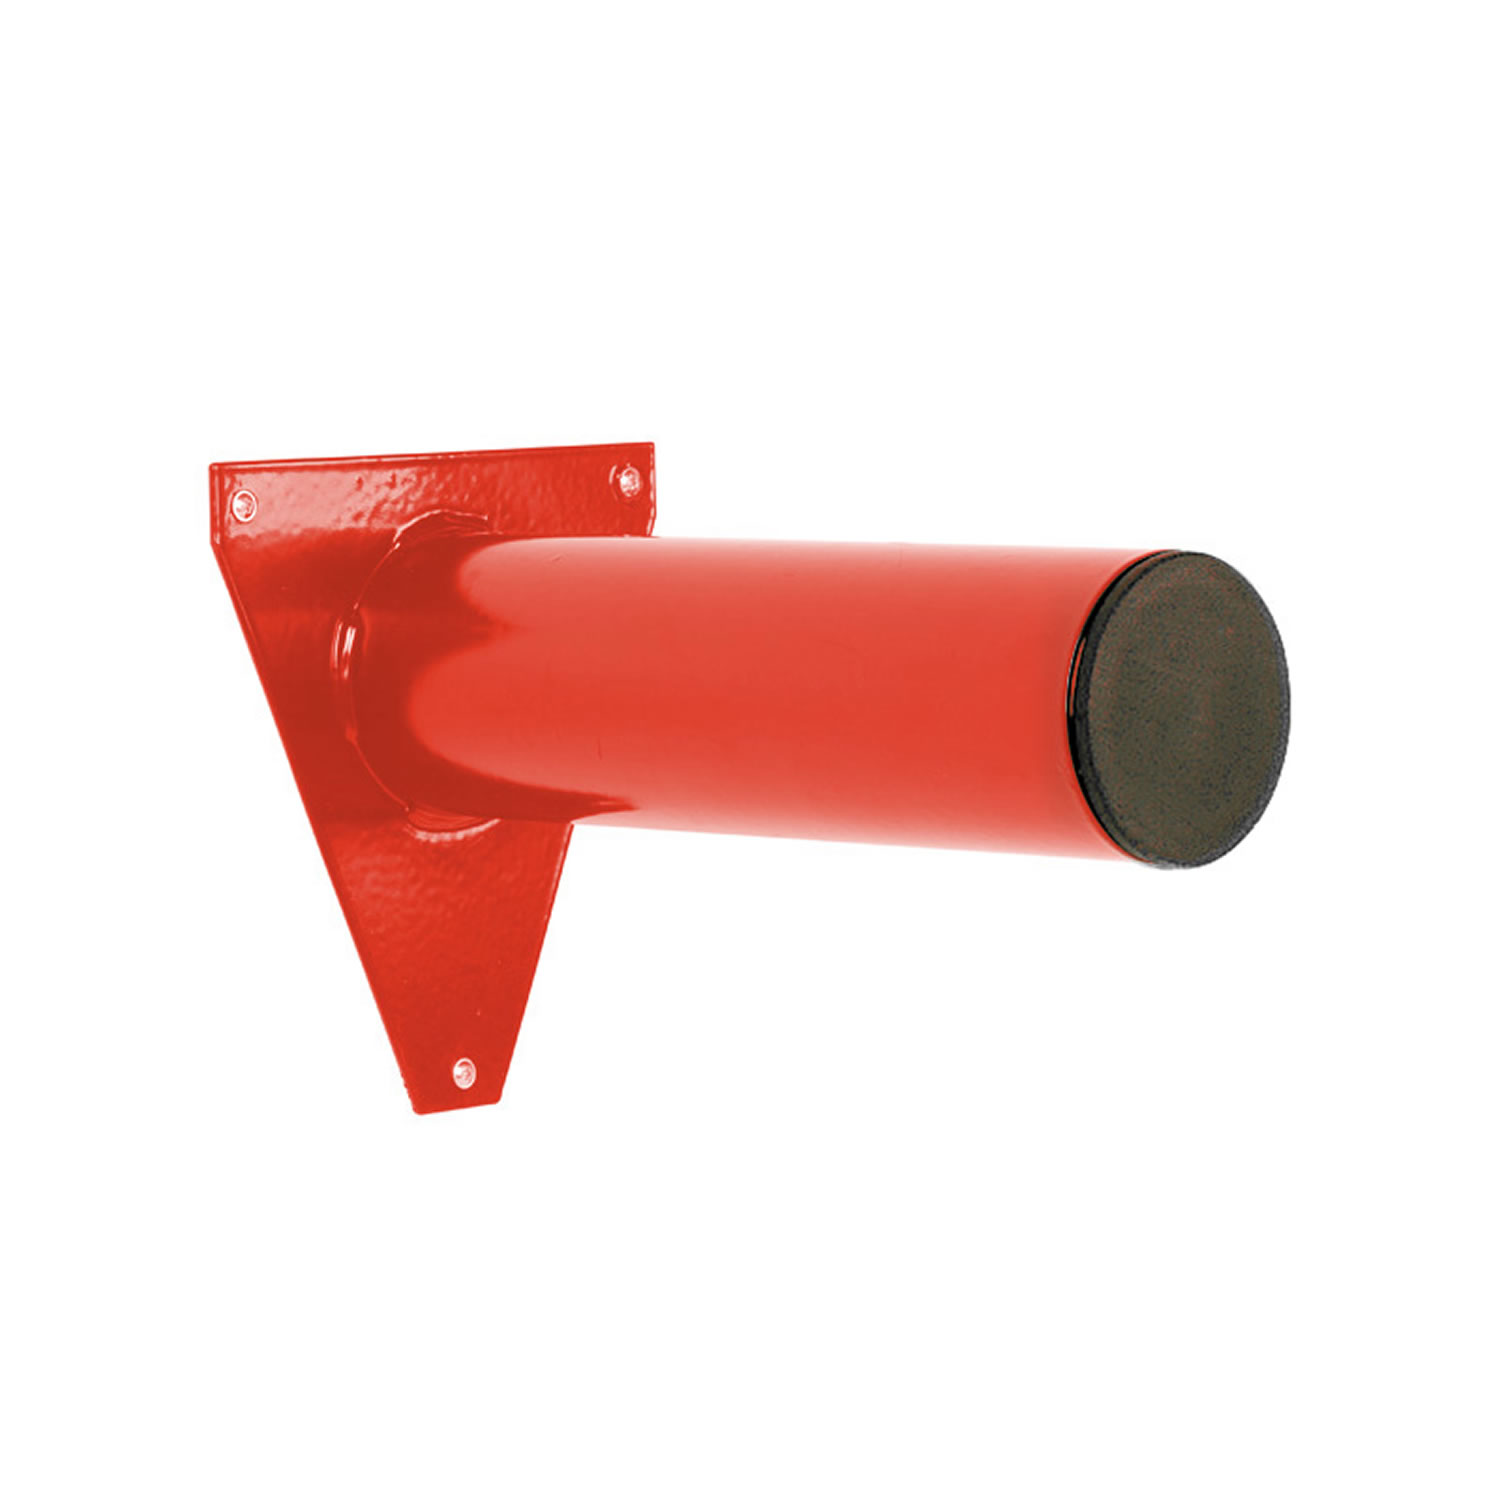 STUBBS DISPLAY POLE LONG S208 RED LONG